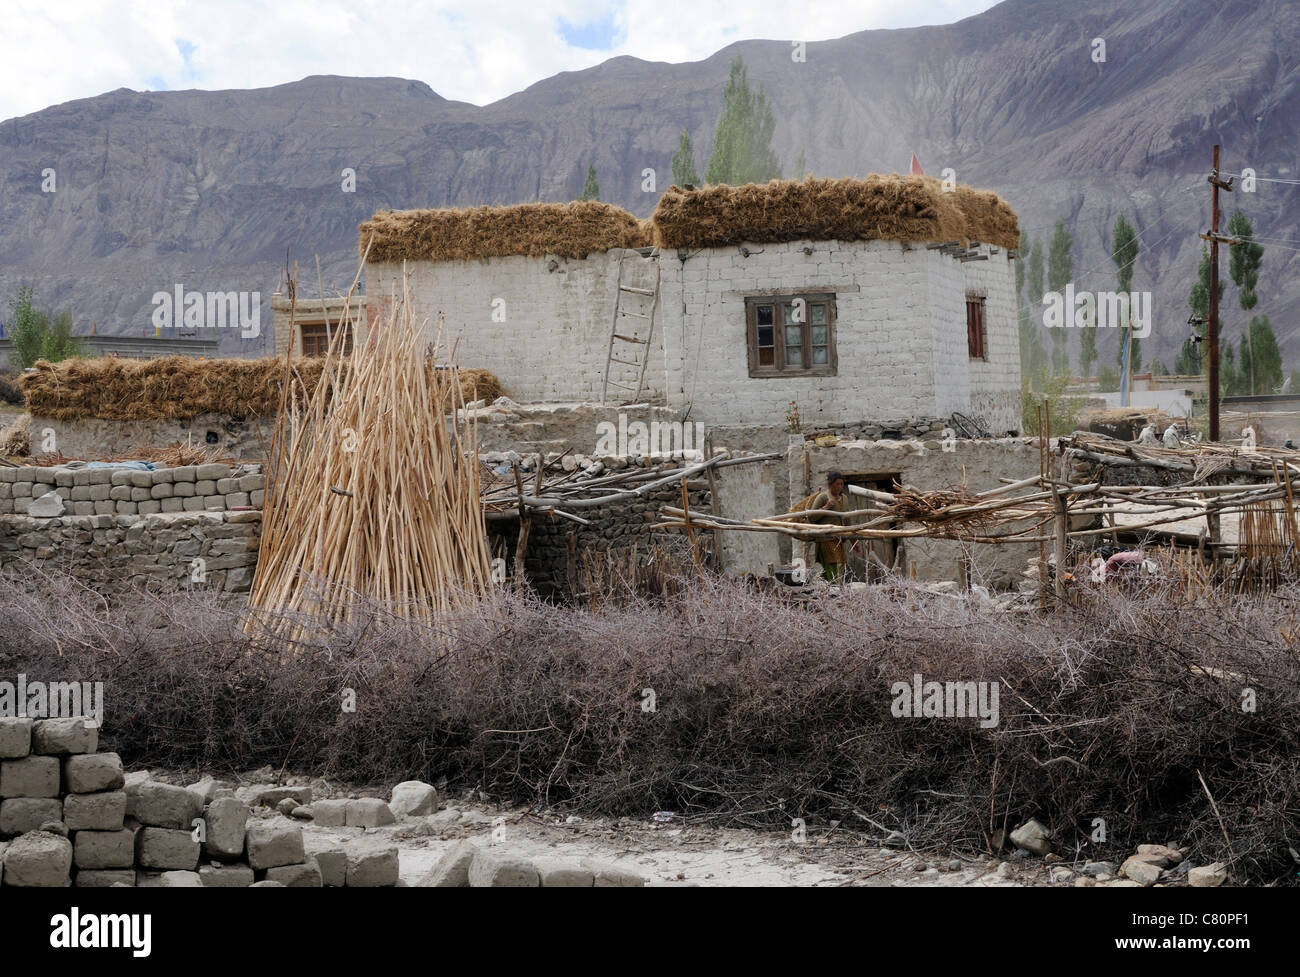 A traditional flat-roofed house in the Nubra Valley, Ladakh. Hay for winter fodder is stored on the roof . Stock Photo